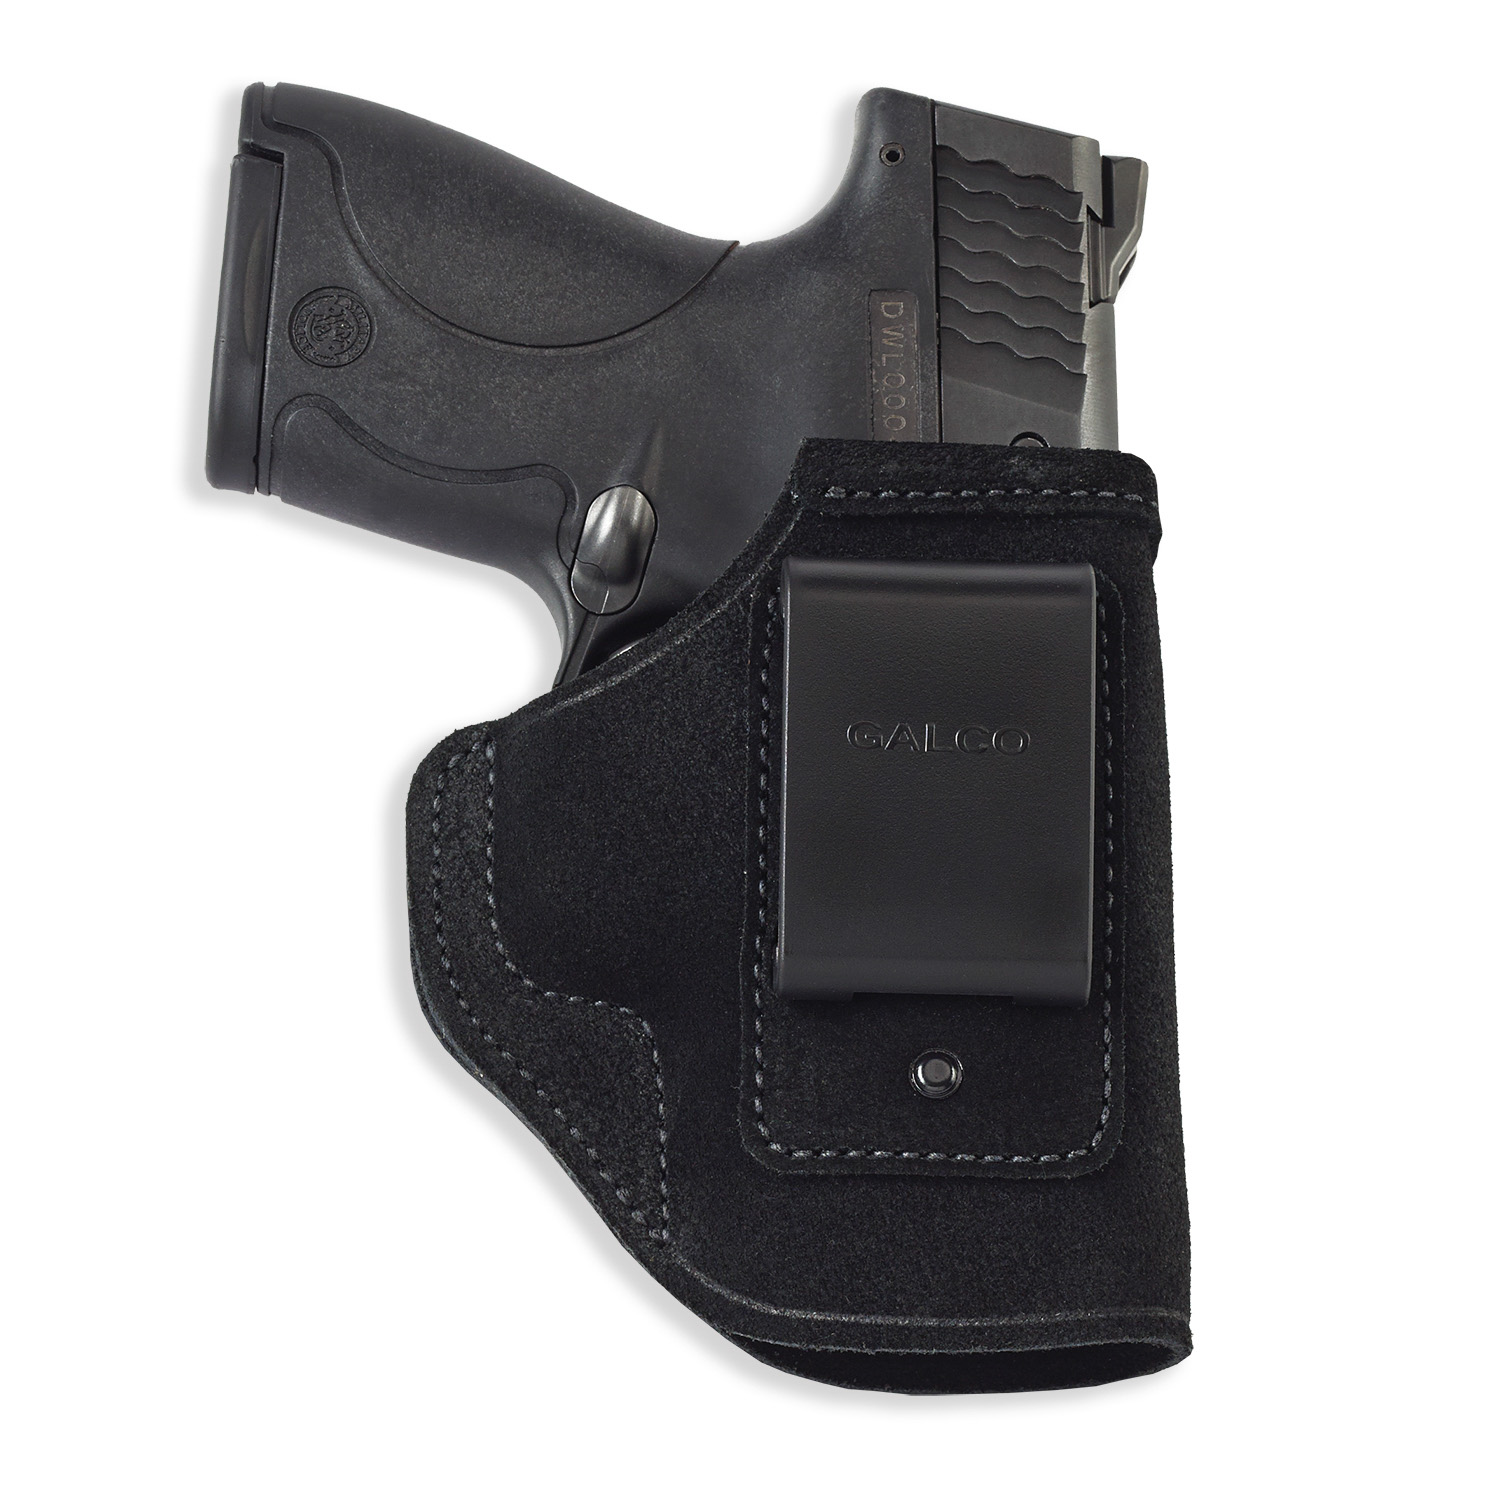 CONCEAL CARRY. SOFT LEATHER HOLSTER FOR GLOCK 30 IWB INSIDE THE PANTS 